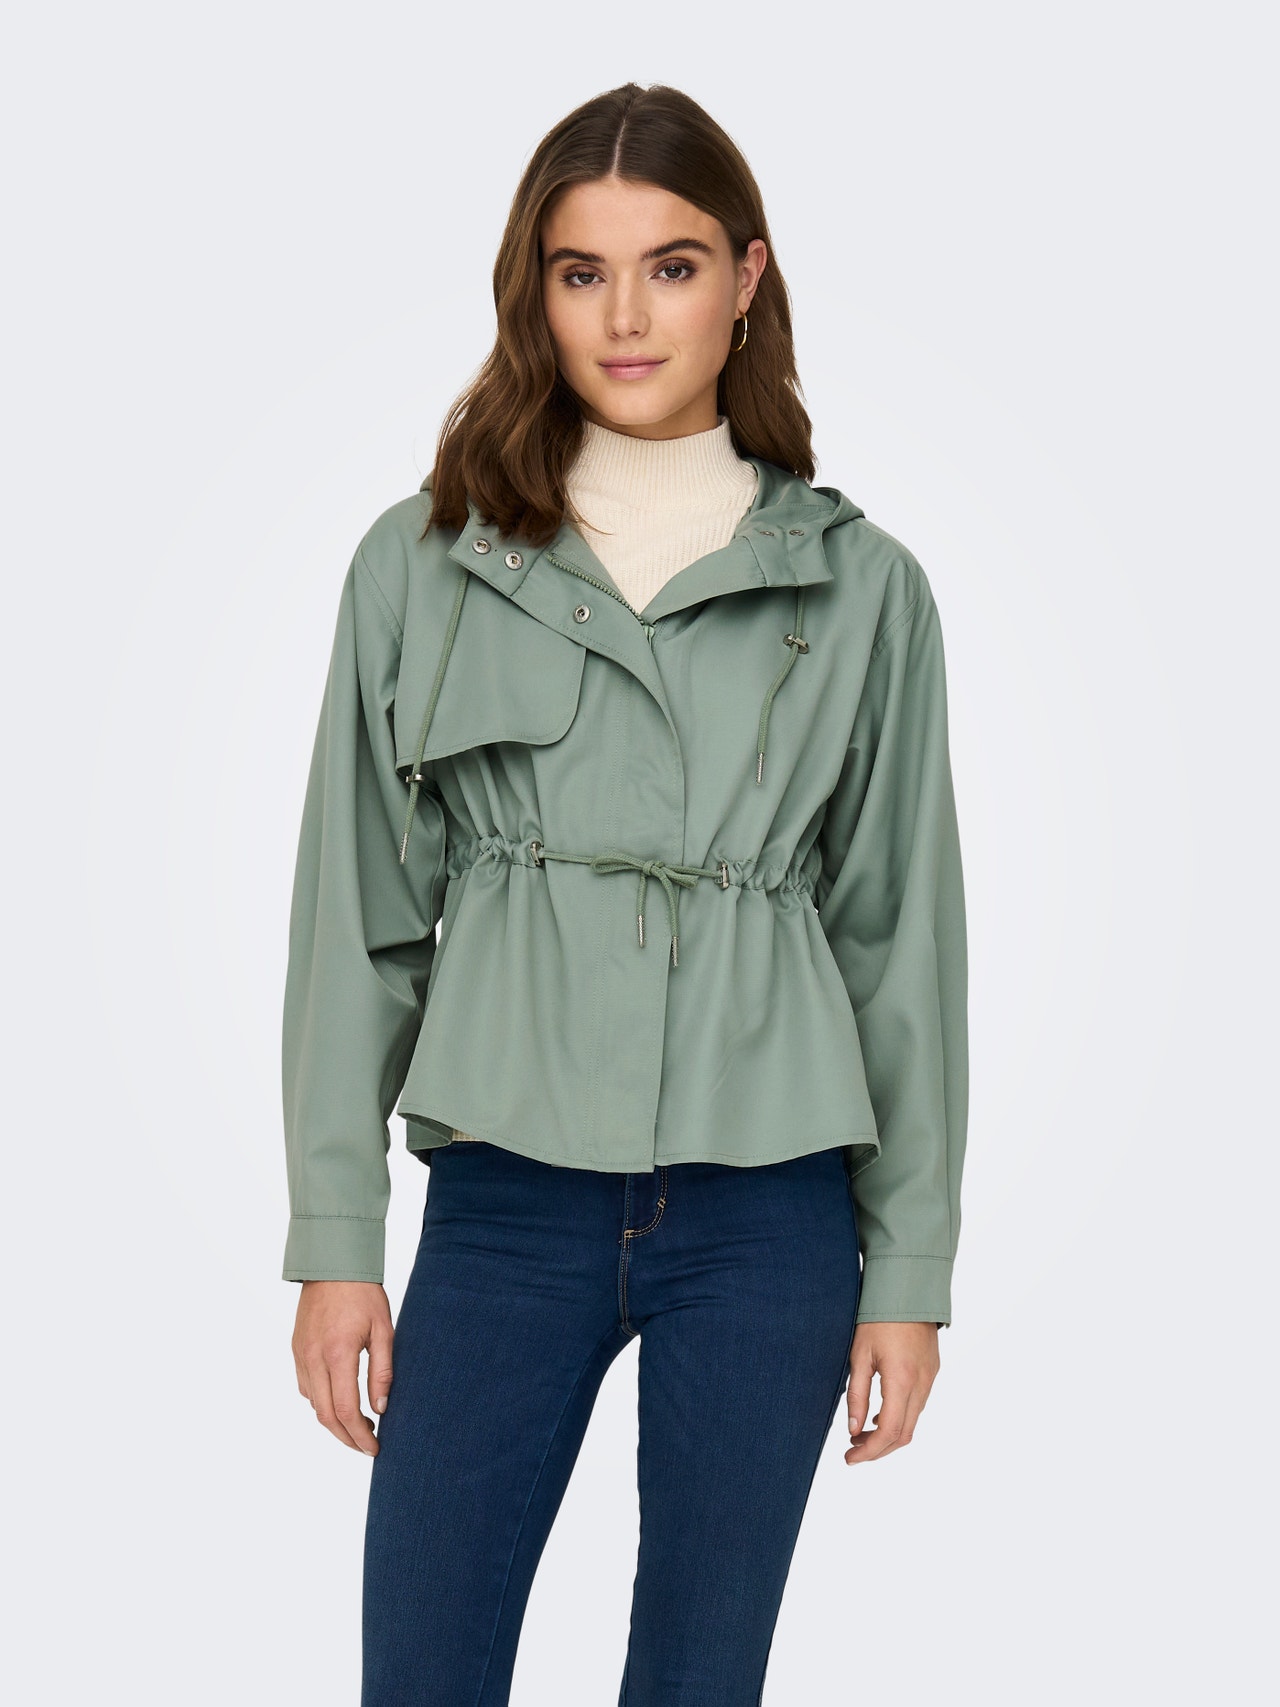 ONLY Hood Jacket -Lily Pad - 15284588